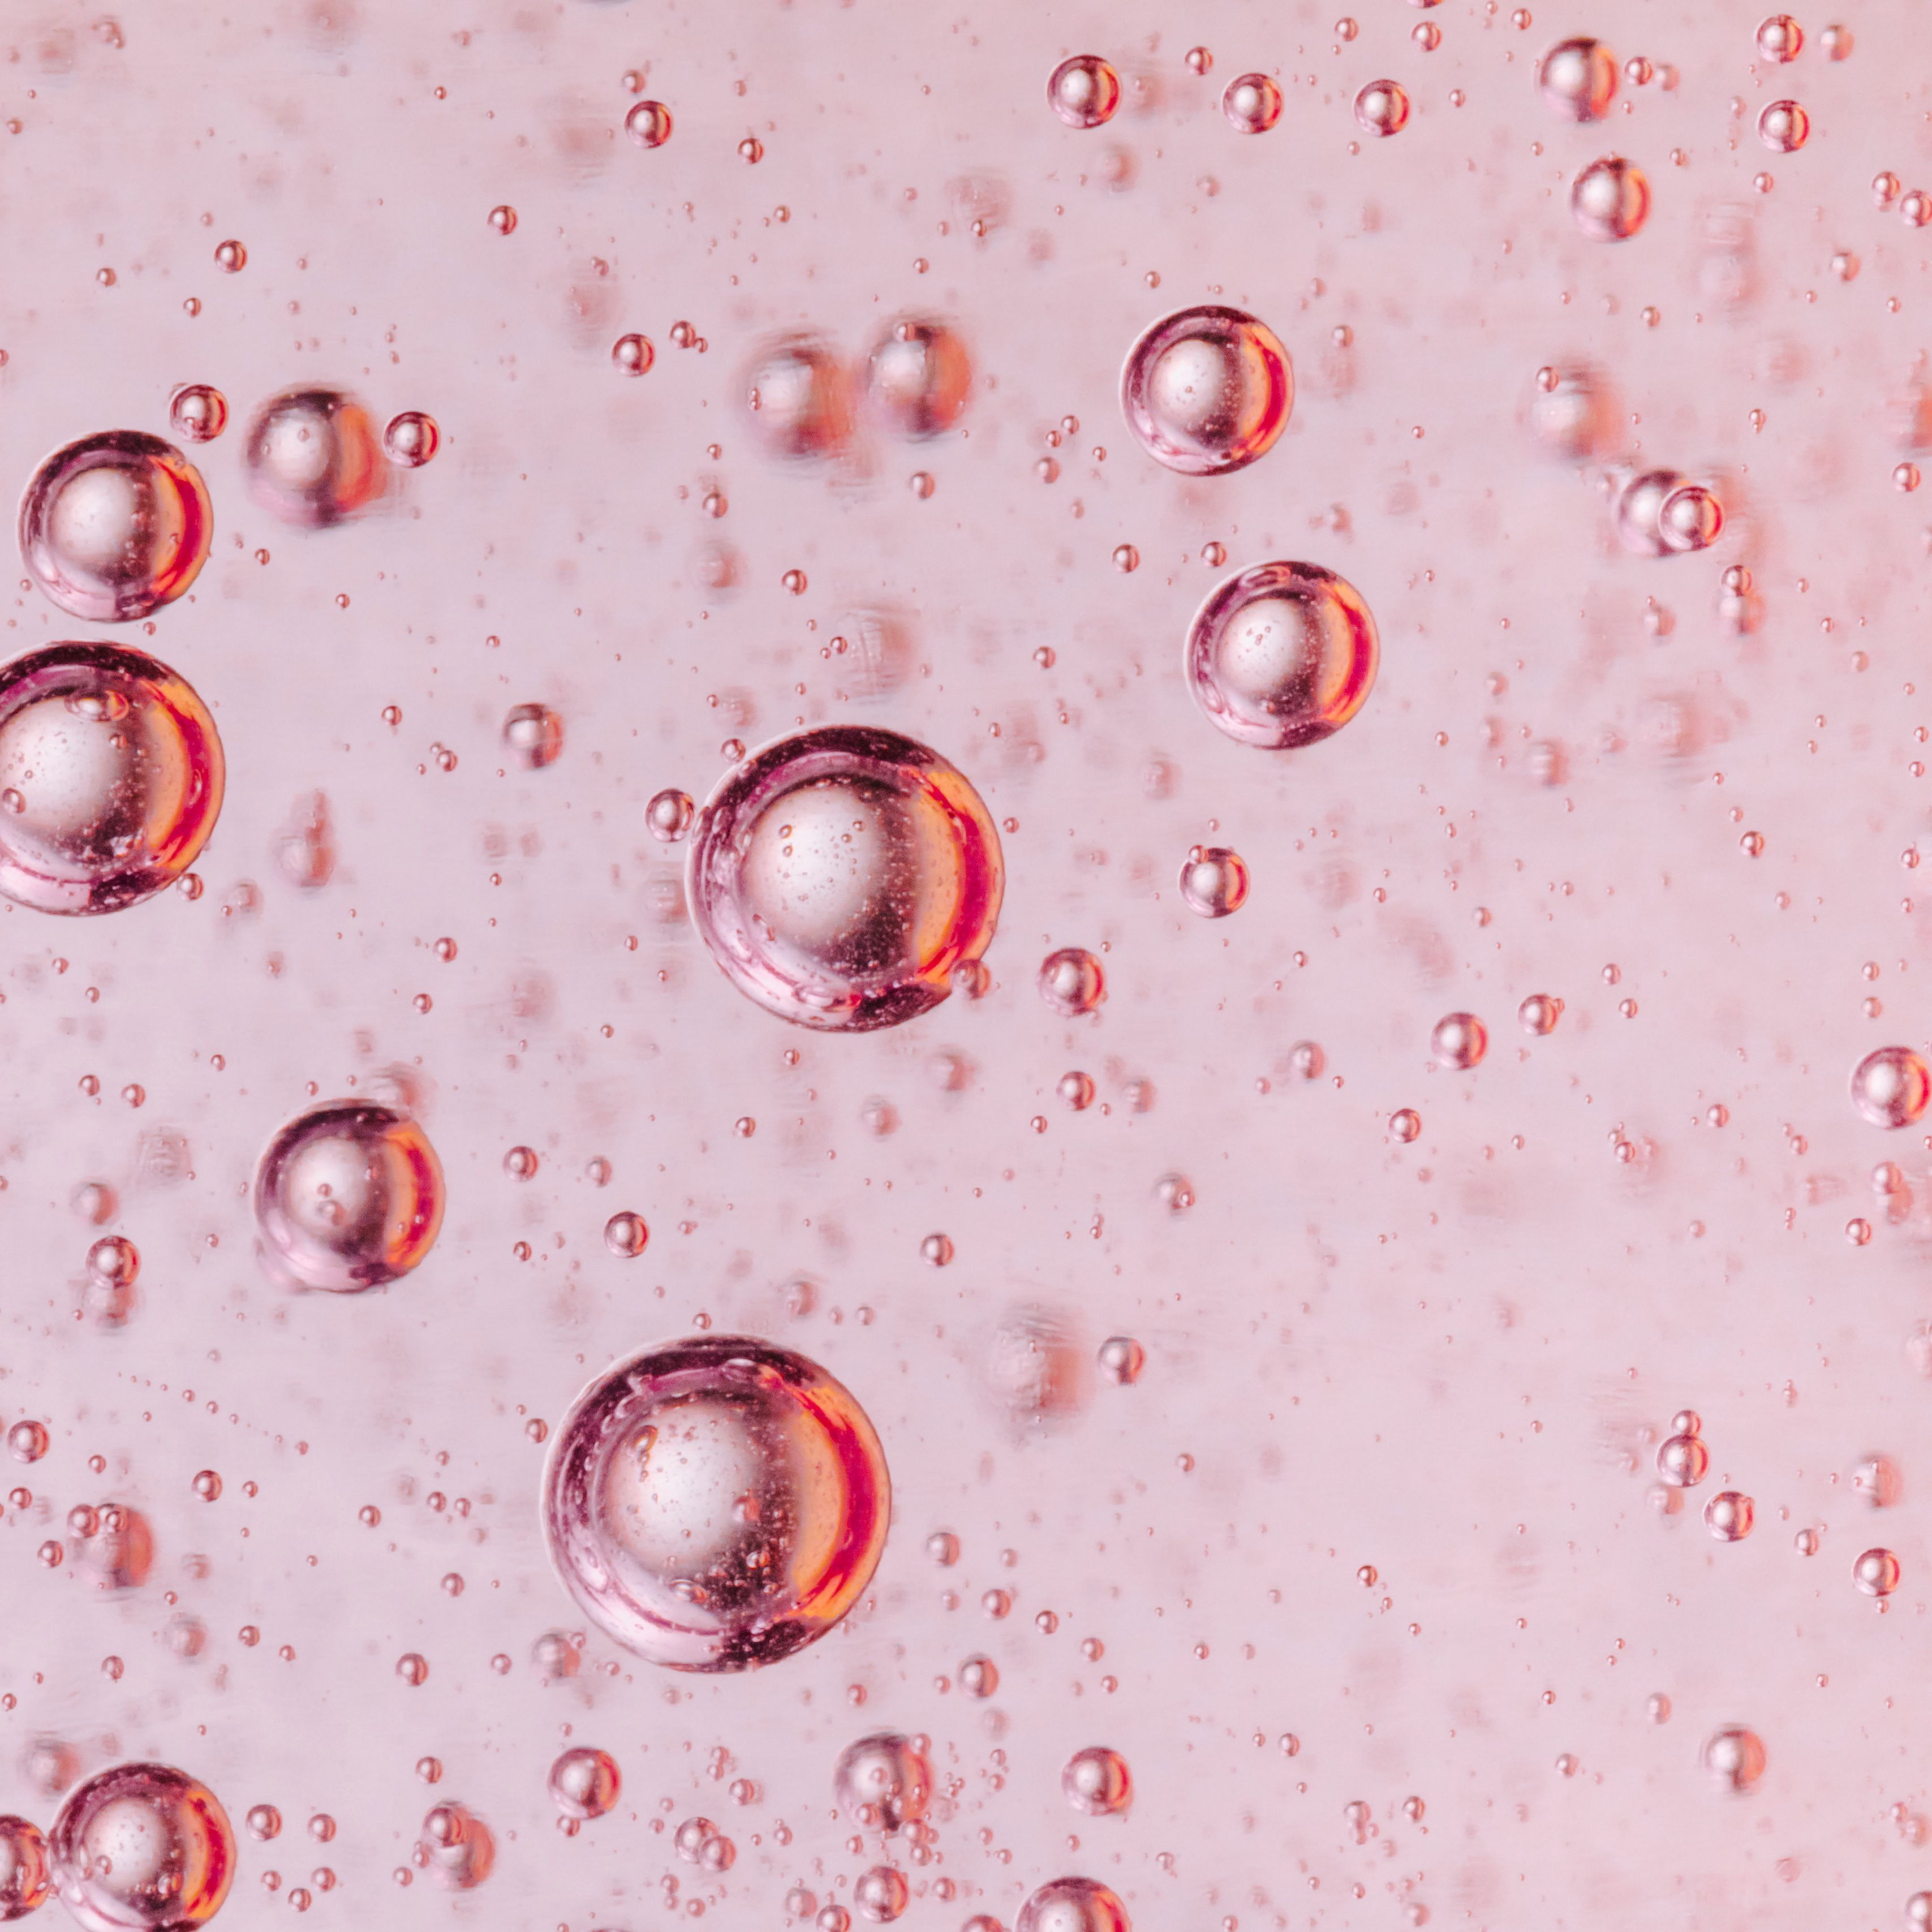 A close up of droplets of liquid on a pink background - Bubbles